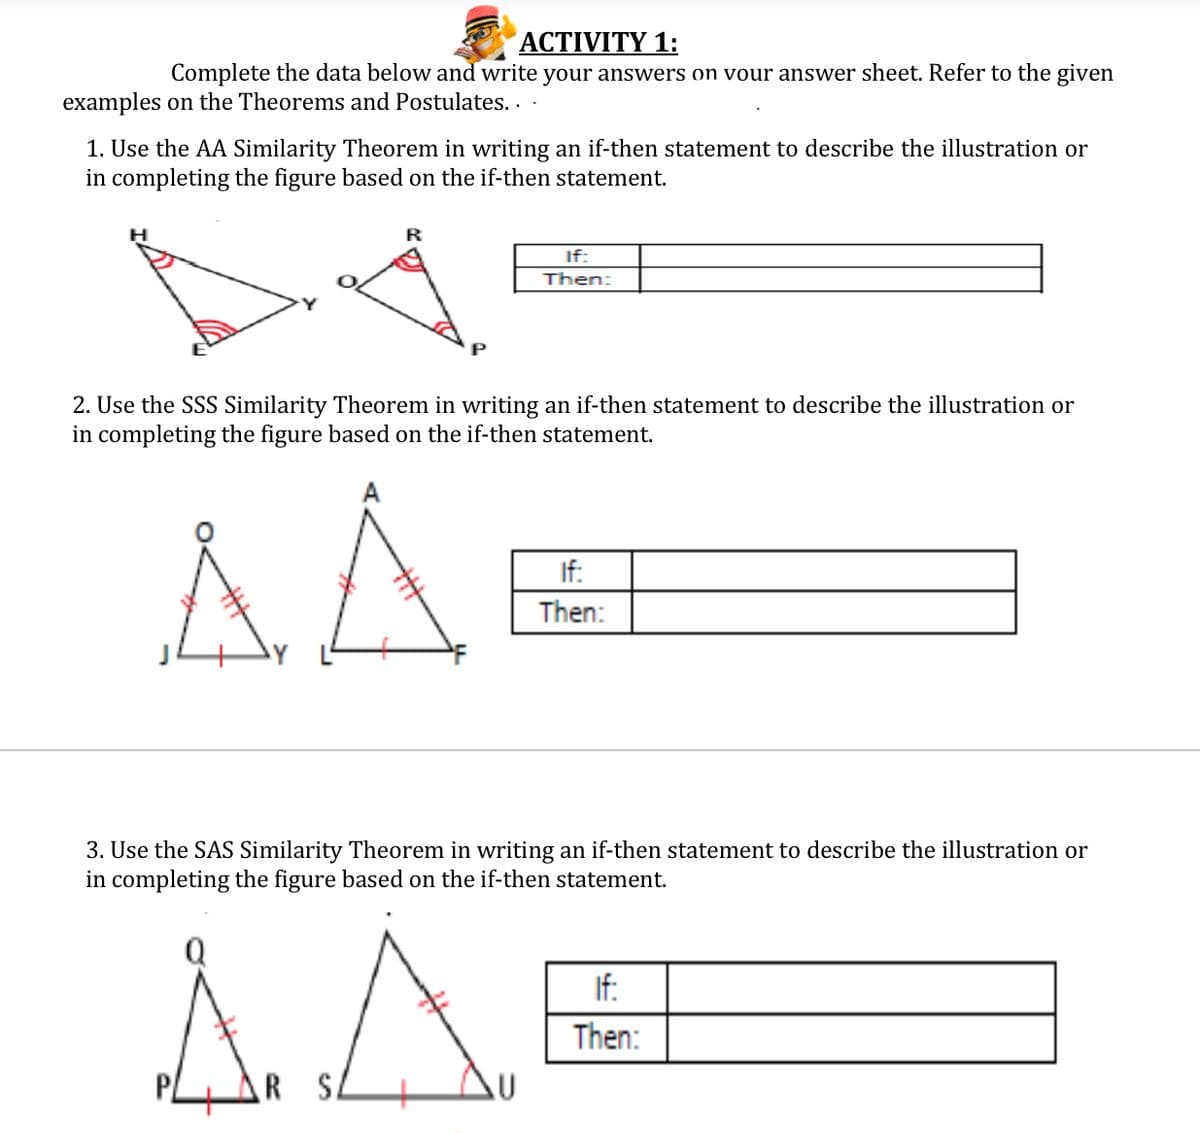 ACTIVITY 1:
Complete the data below and write your answers on vour answer sheet. Refer to the given
examples on the Theorems and Postulates. .
1. Use the AA Similarity Theorem in writing an if-then statement to describe the illustration or
in completing the figure based on the if-then statement.
If:
Then:
P
2. Use the SSS Similarity Theorem in writing an if-then statement to describe the illustration or
in completing the figure based on the if-then statement.
If:
Then:
3. Use the SAS Similarity Theore
in completing the figure based on the if-then statement.
writing an if-then statement to describe the illustration or
If:
Then:
S.
